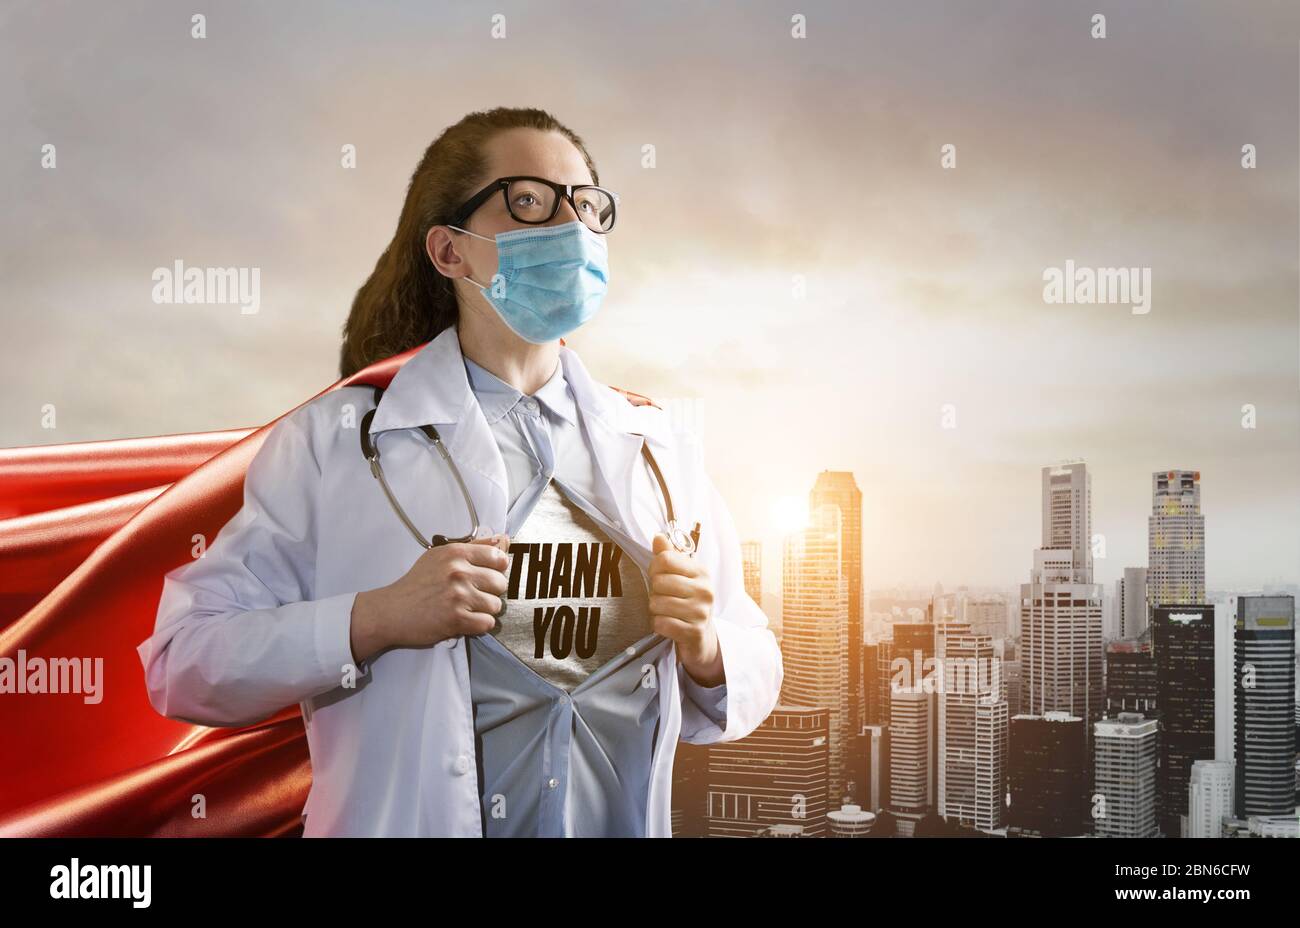 Heroic doctor fighting with epidemic Stock Photo